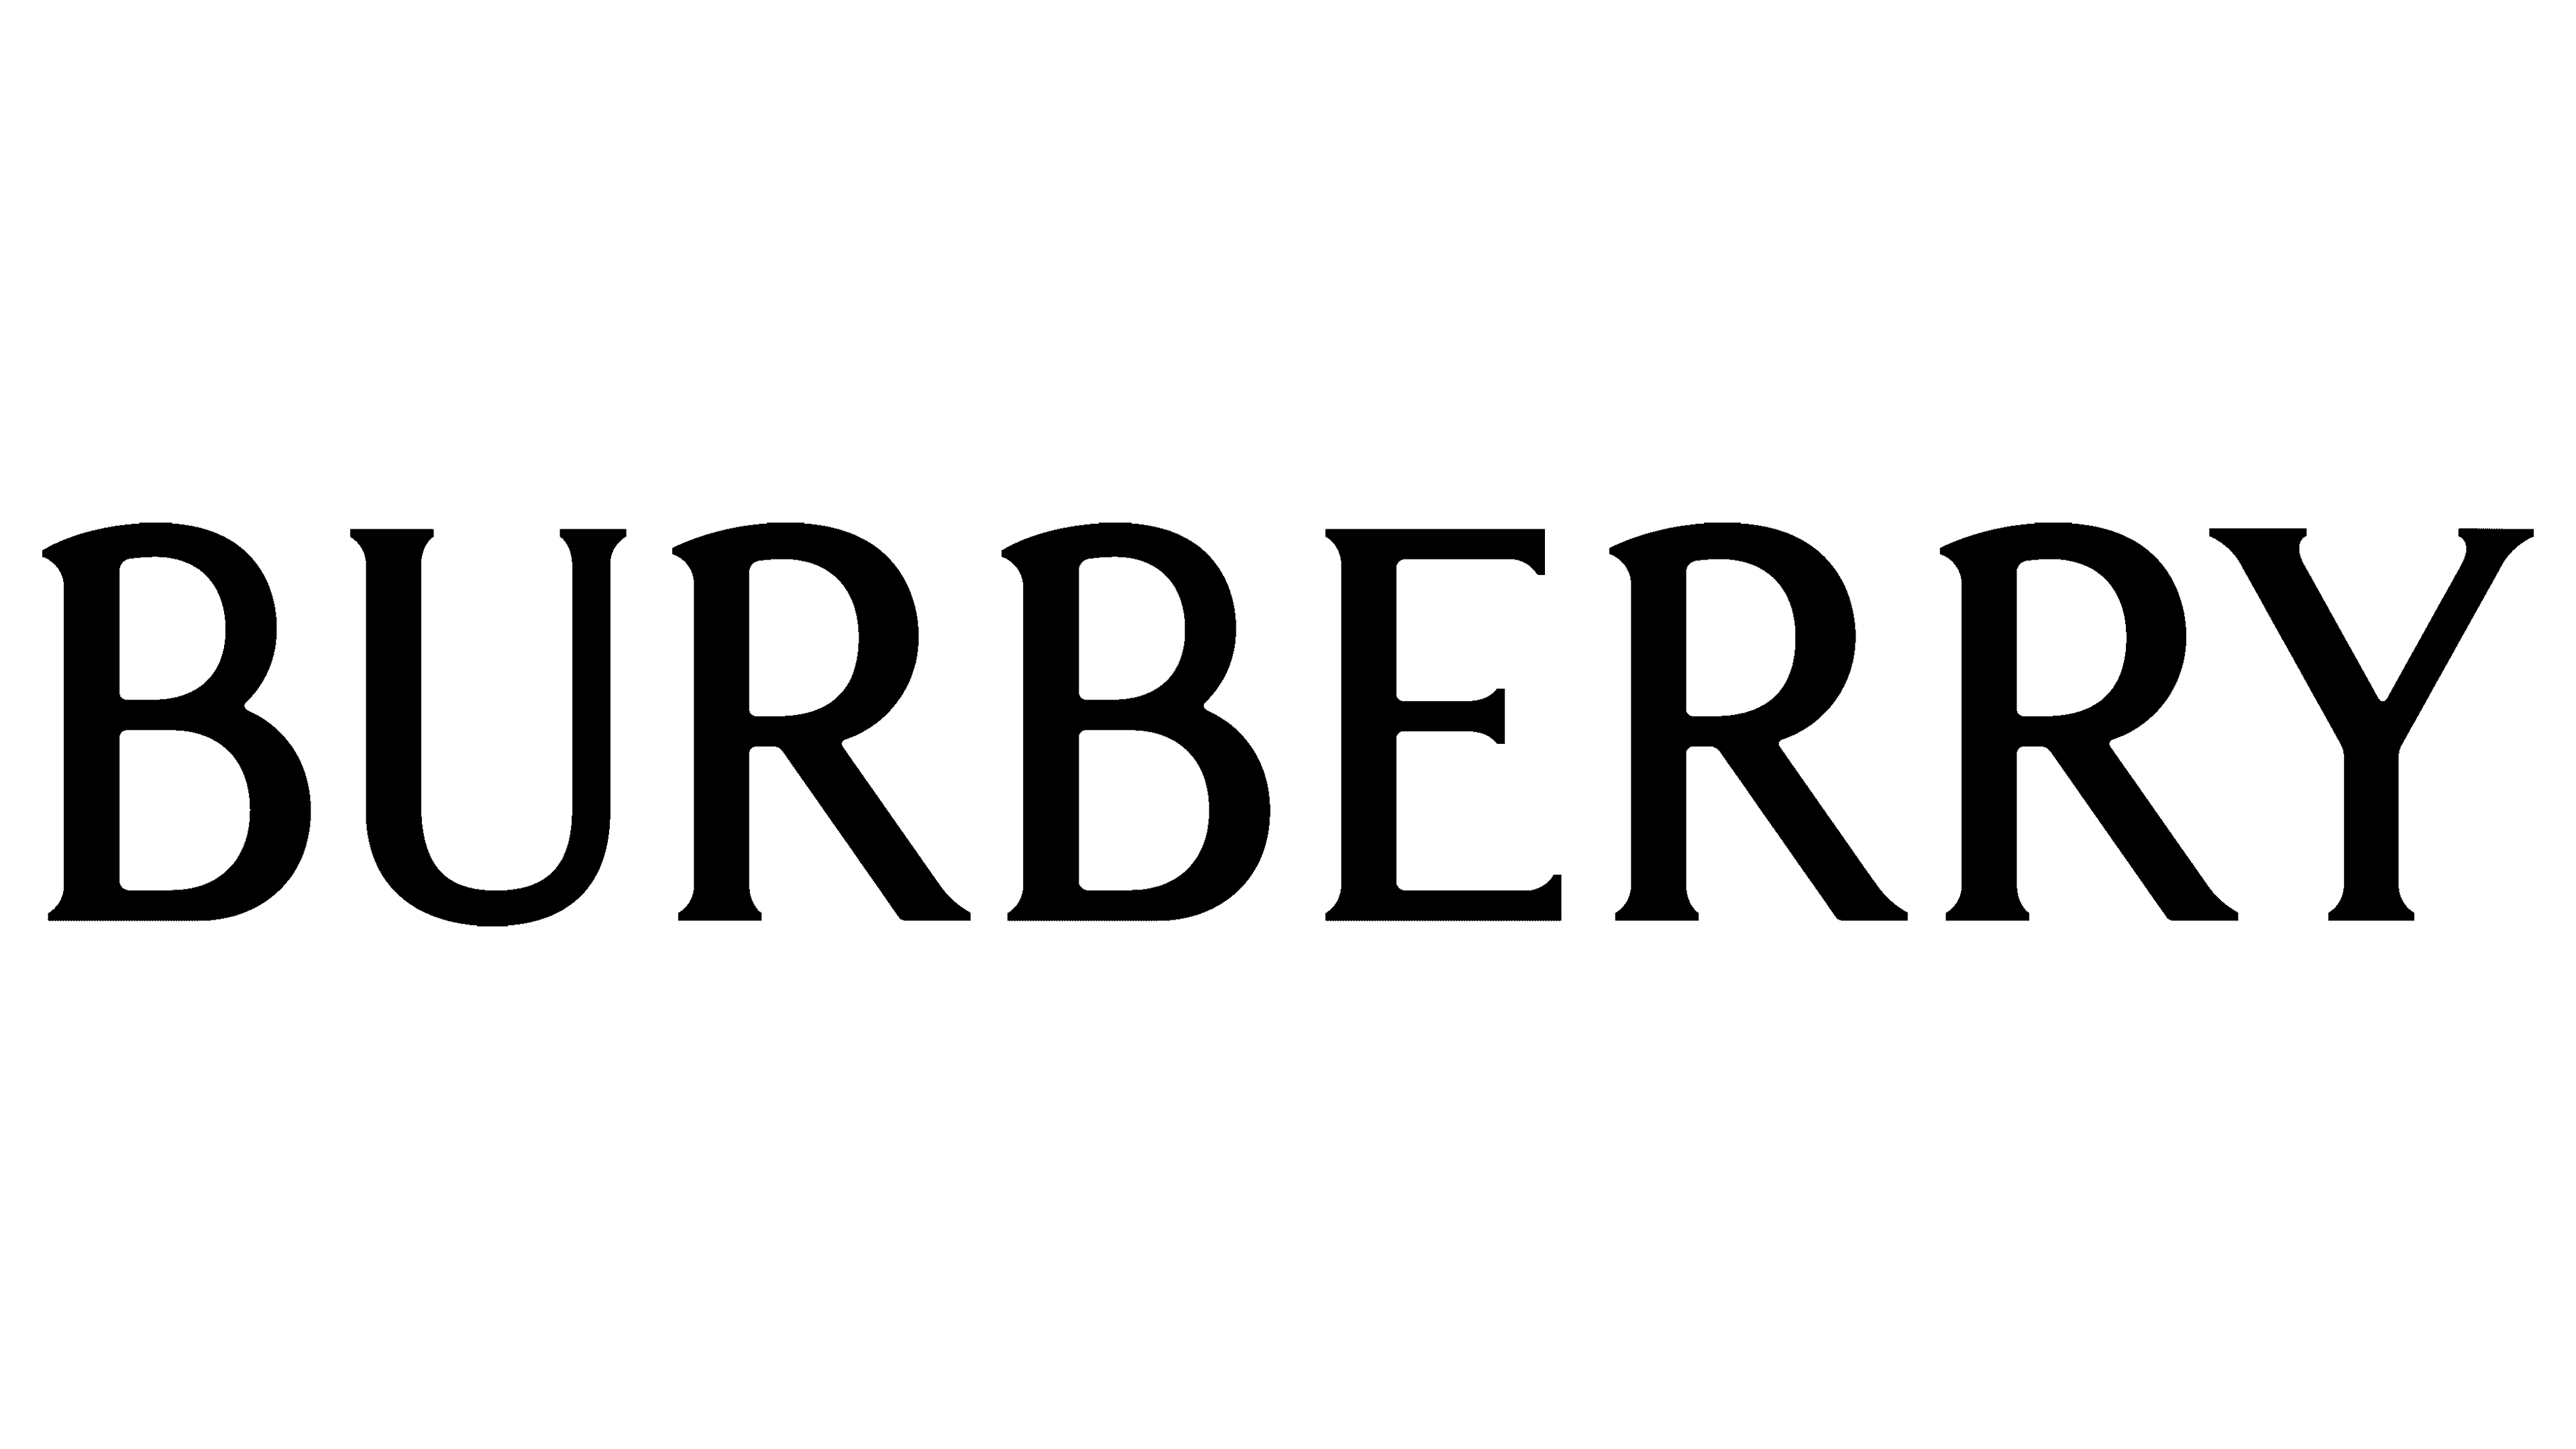 Burberry logo and symbol, meaning 